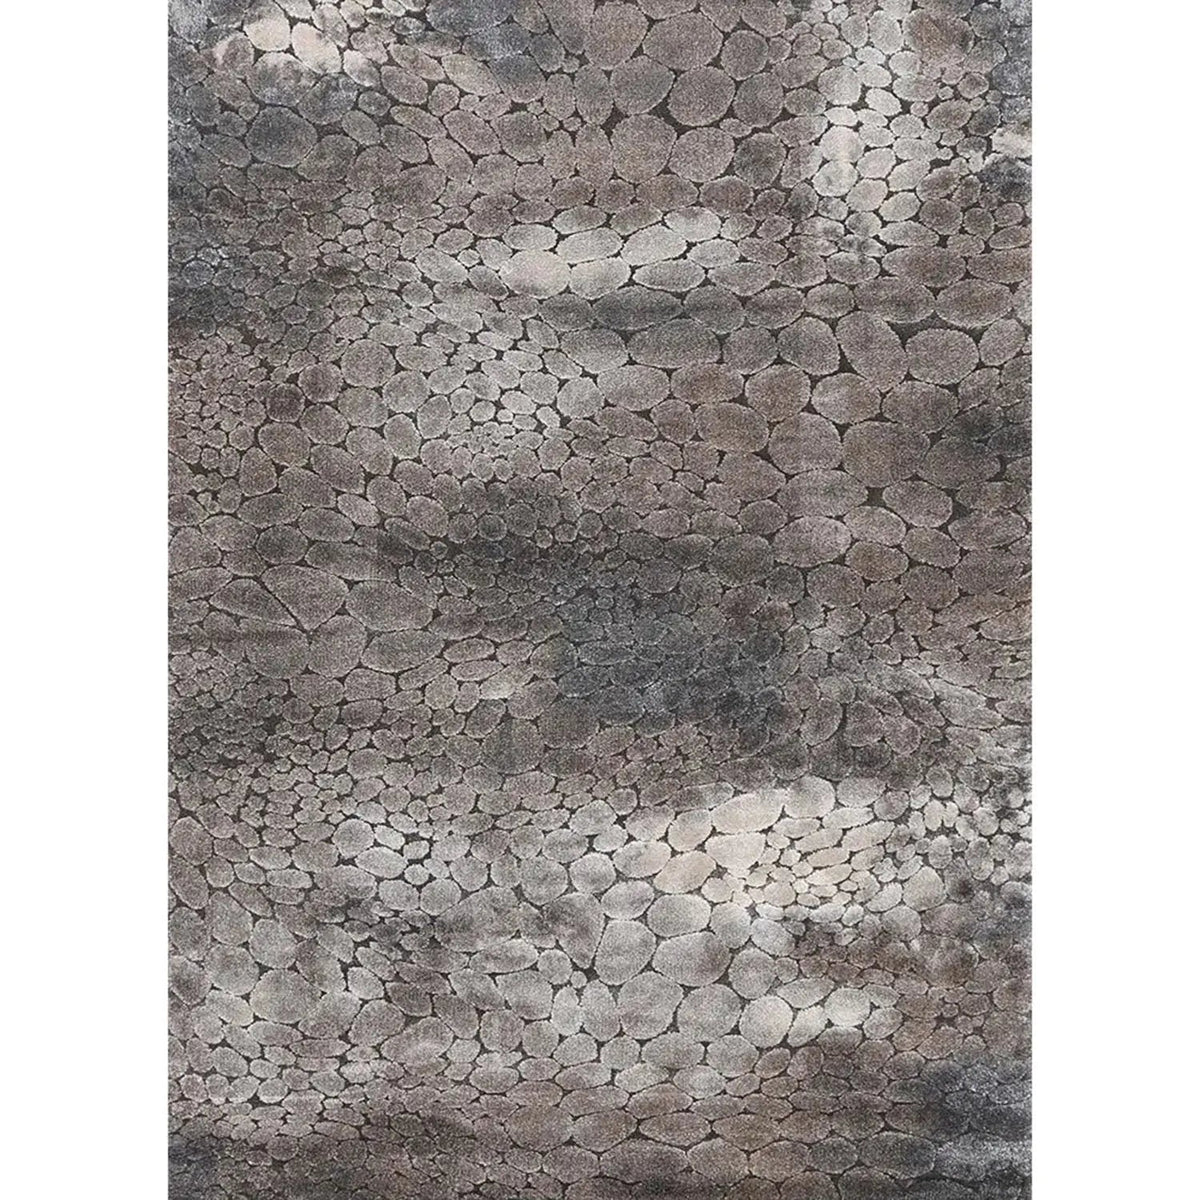 Crete Pebble Patterned Grey Rug - Rugs - Rugs a Million